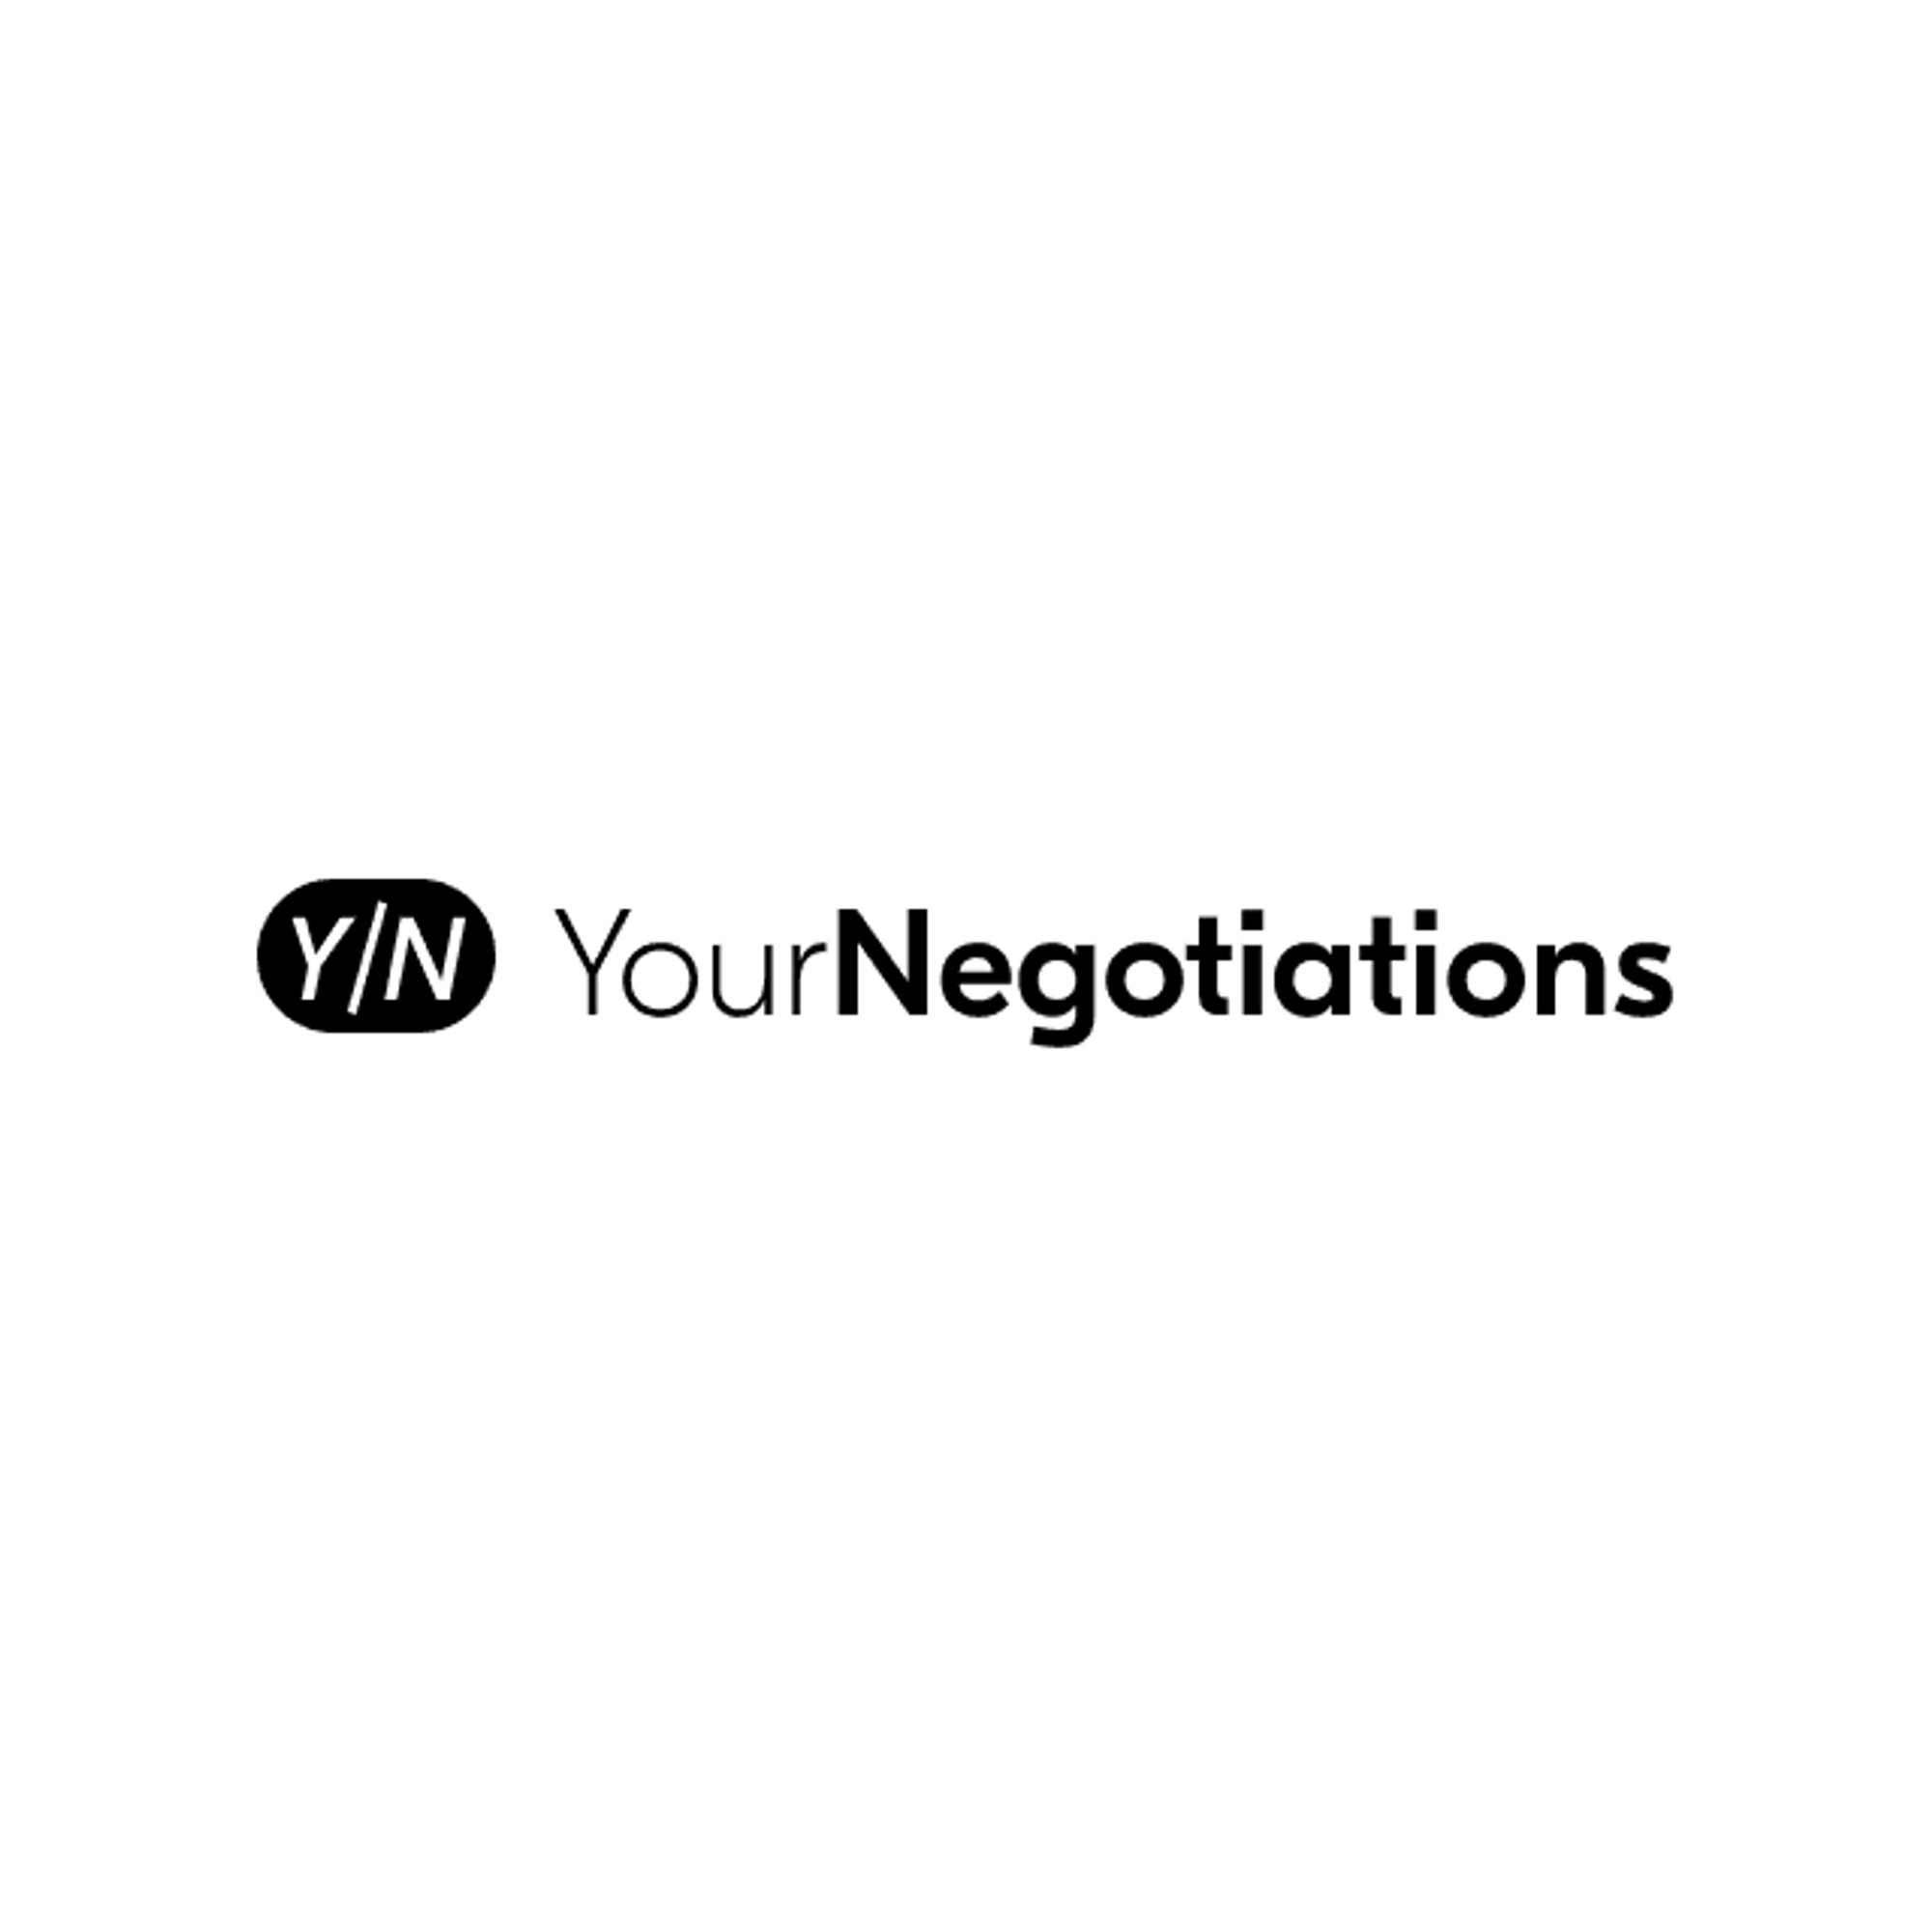 YourNegotiations - the salary negotiations experts